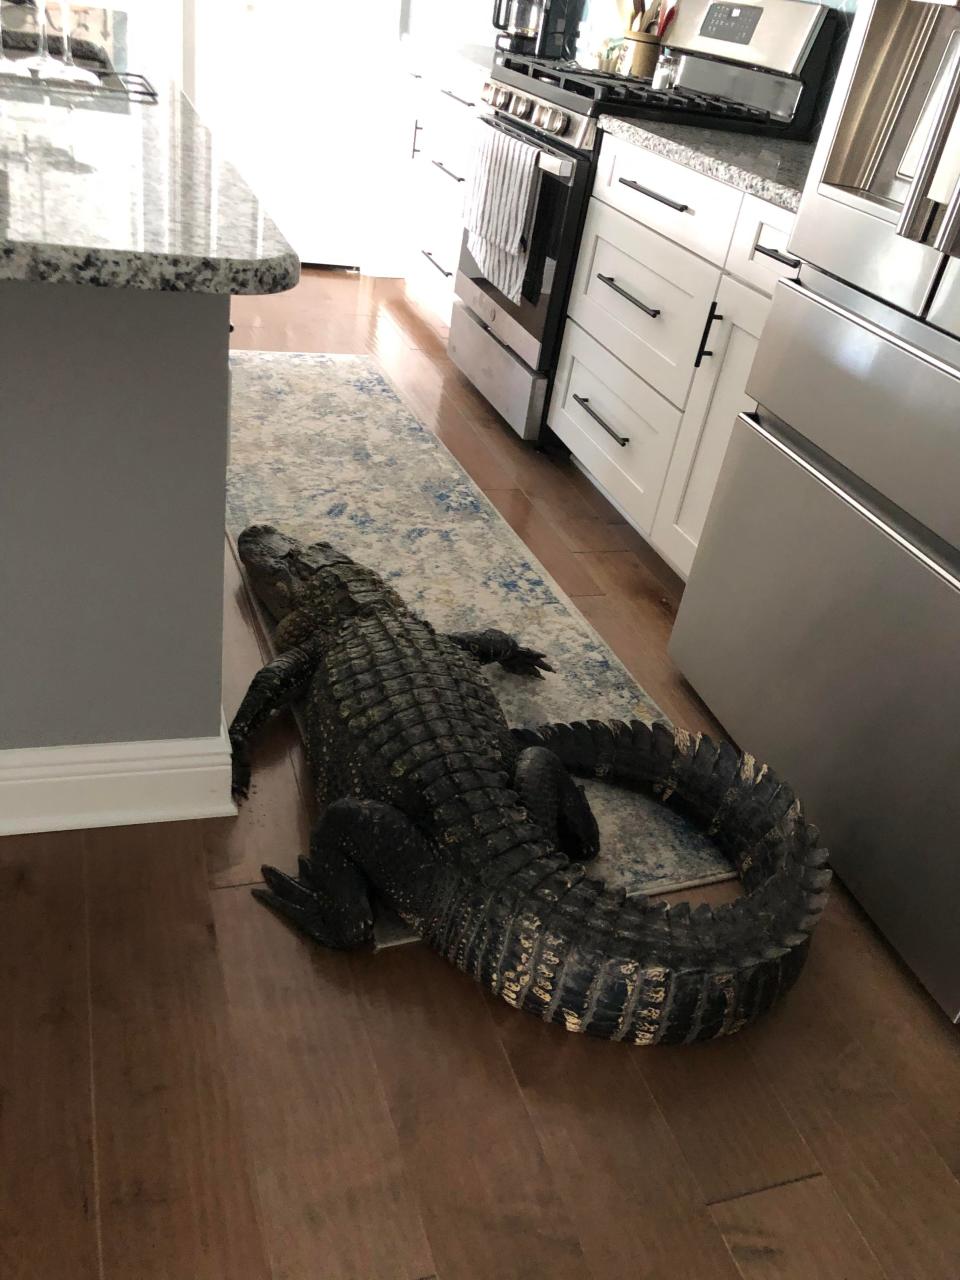 Alligator stuck in kitchen. The alligator wandered into Mary Hollenback's home on March 28, 2024.